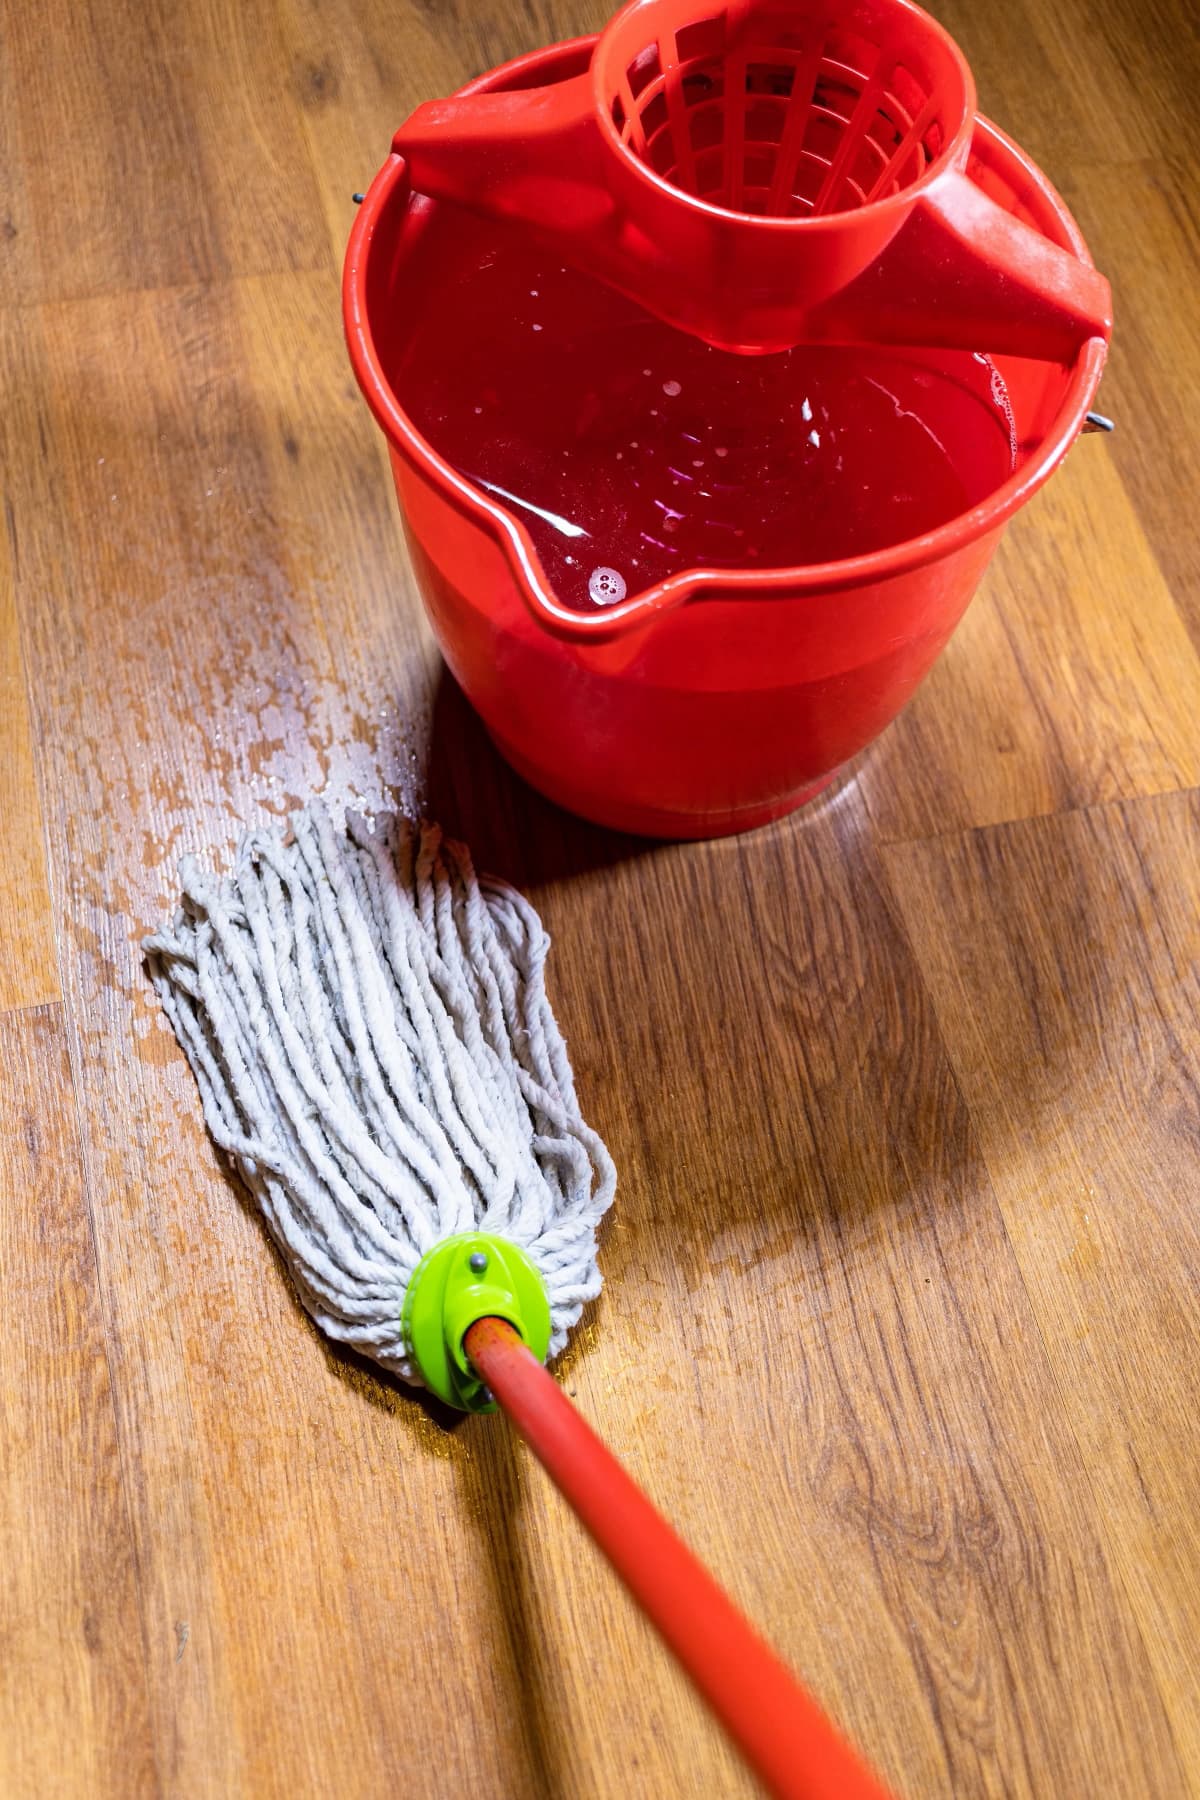 Mop next to mop bucket filled with soap water